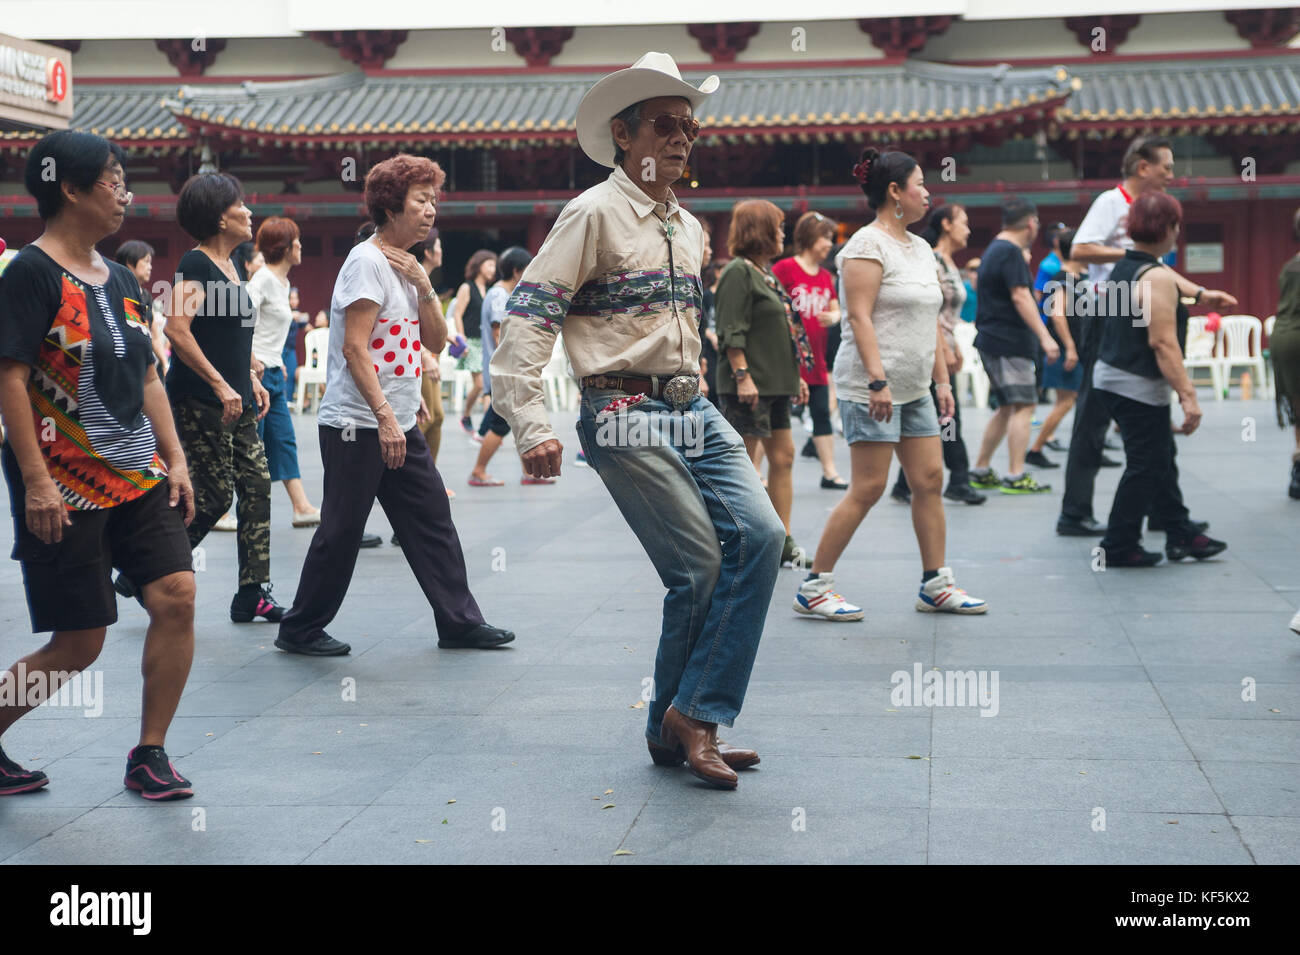 22.10.2017, Singapore, Republic of Singapore, Asia - A group of elderly people meet on Sundays for their line dance at a public square in Chinatown. Stock Photo